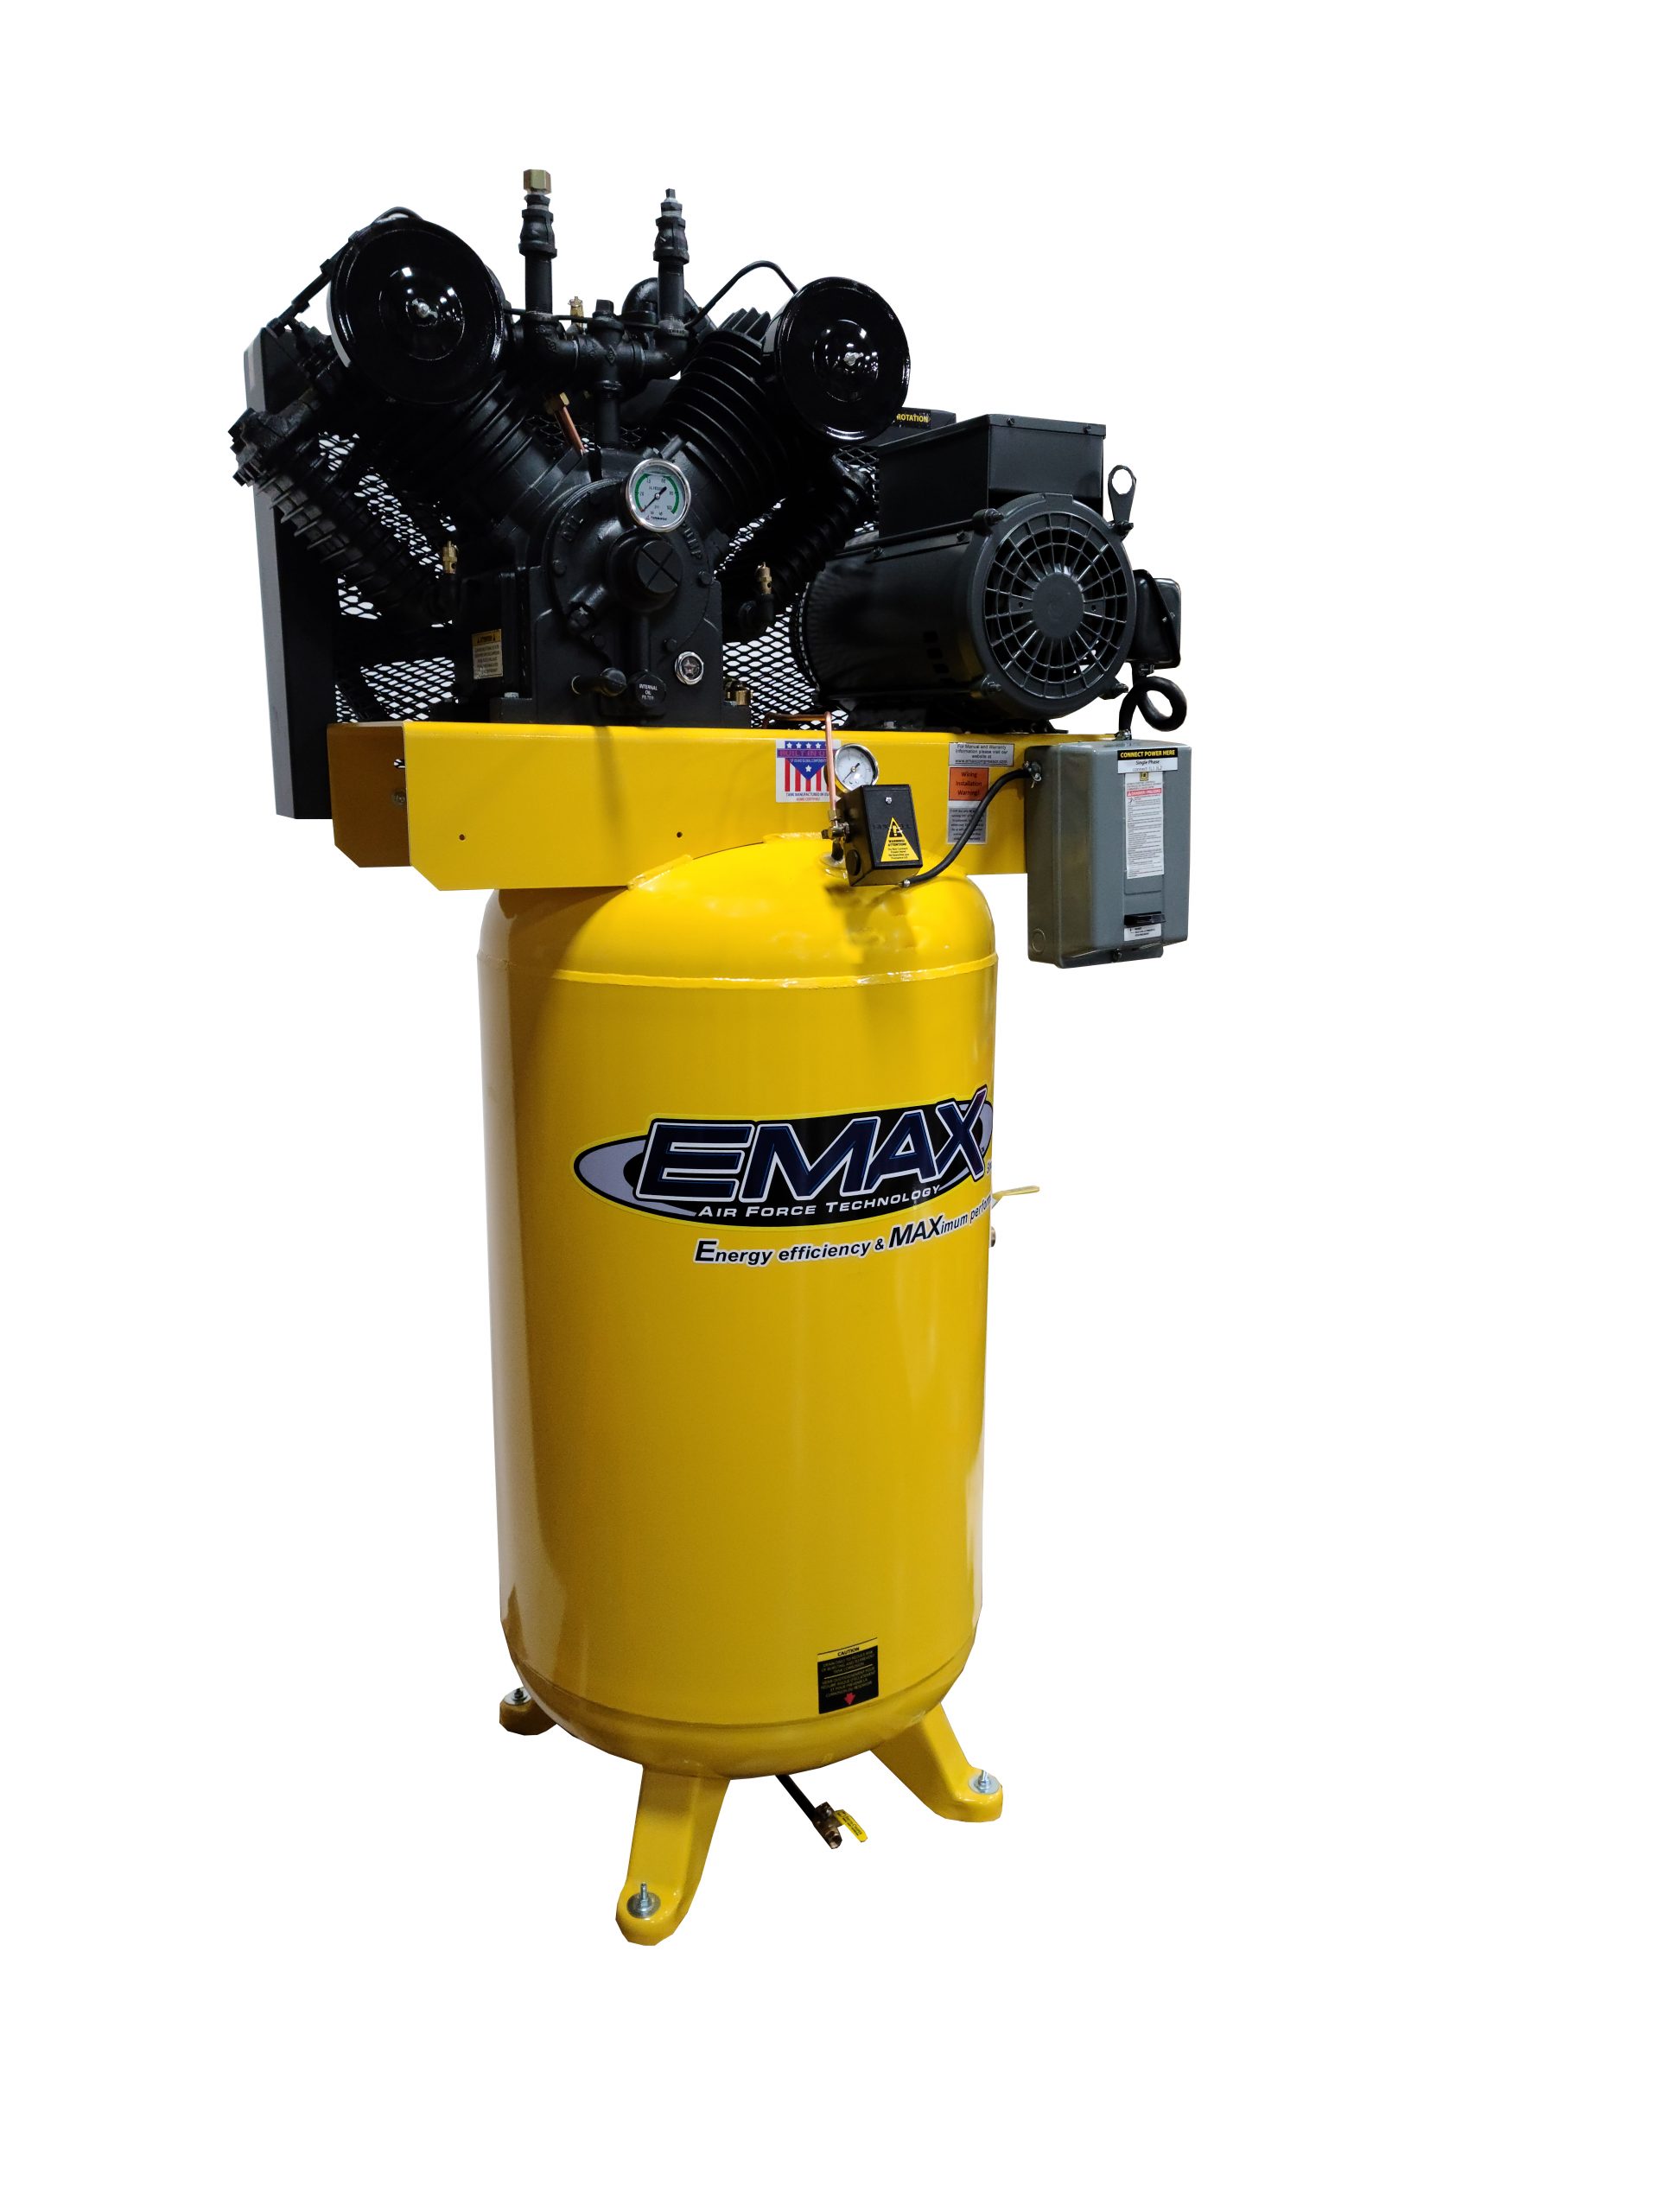 Vertical 7.5 HP Quiet Air Compressor 80-Gallon 1 Phase EMAX Yellow 2-Stage Model ES07V080V1 by EMAX Compressor Industrial Series